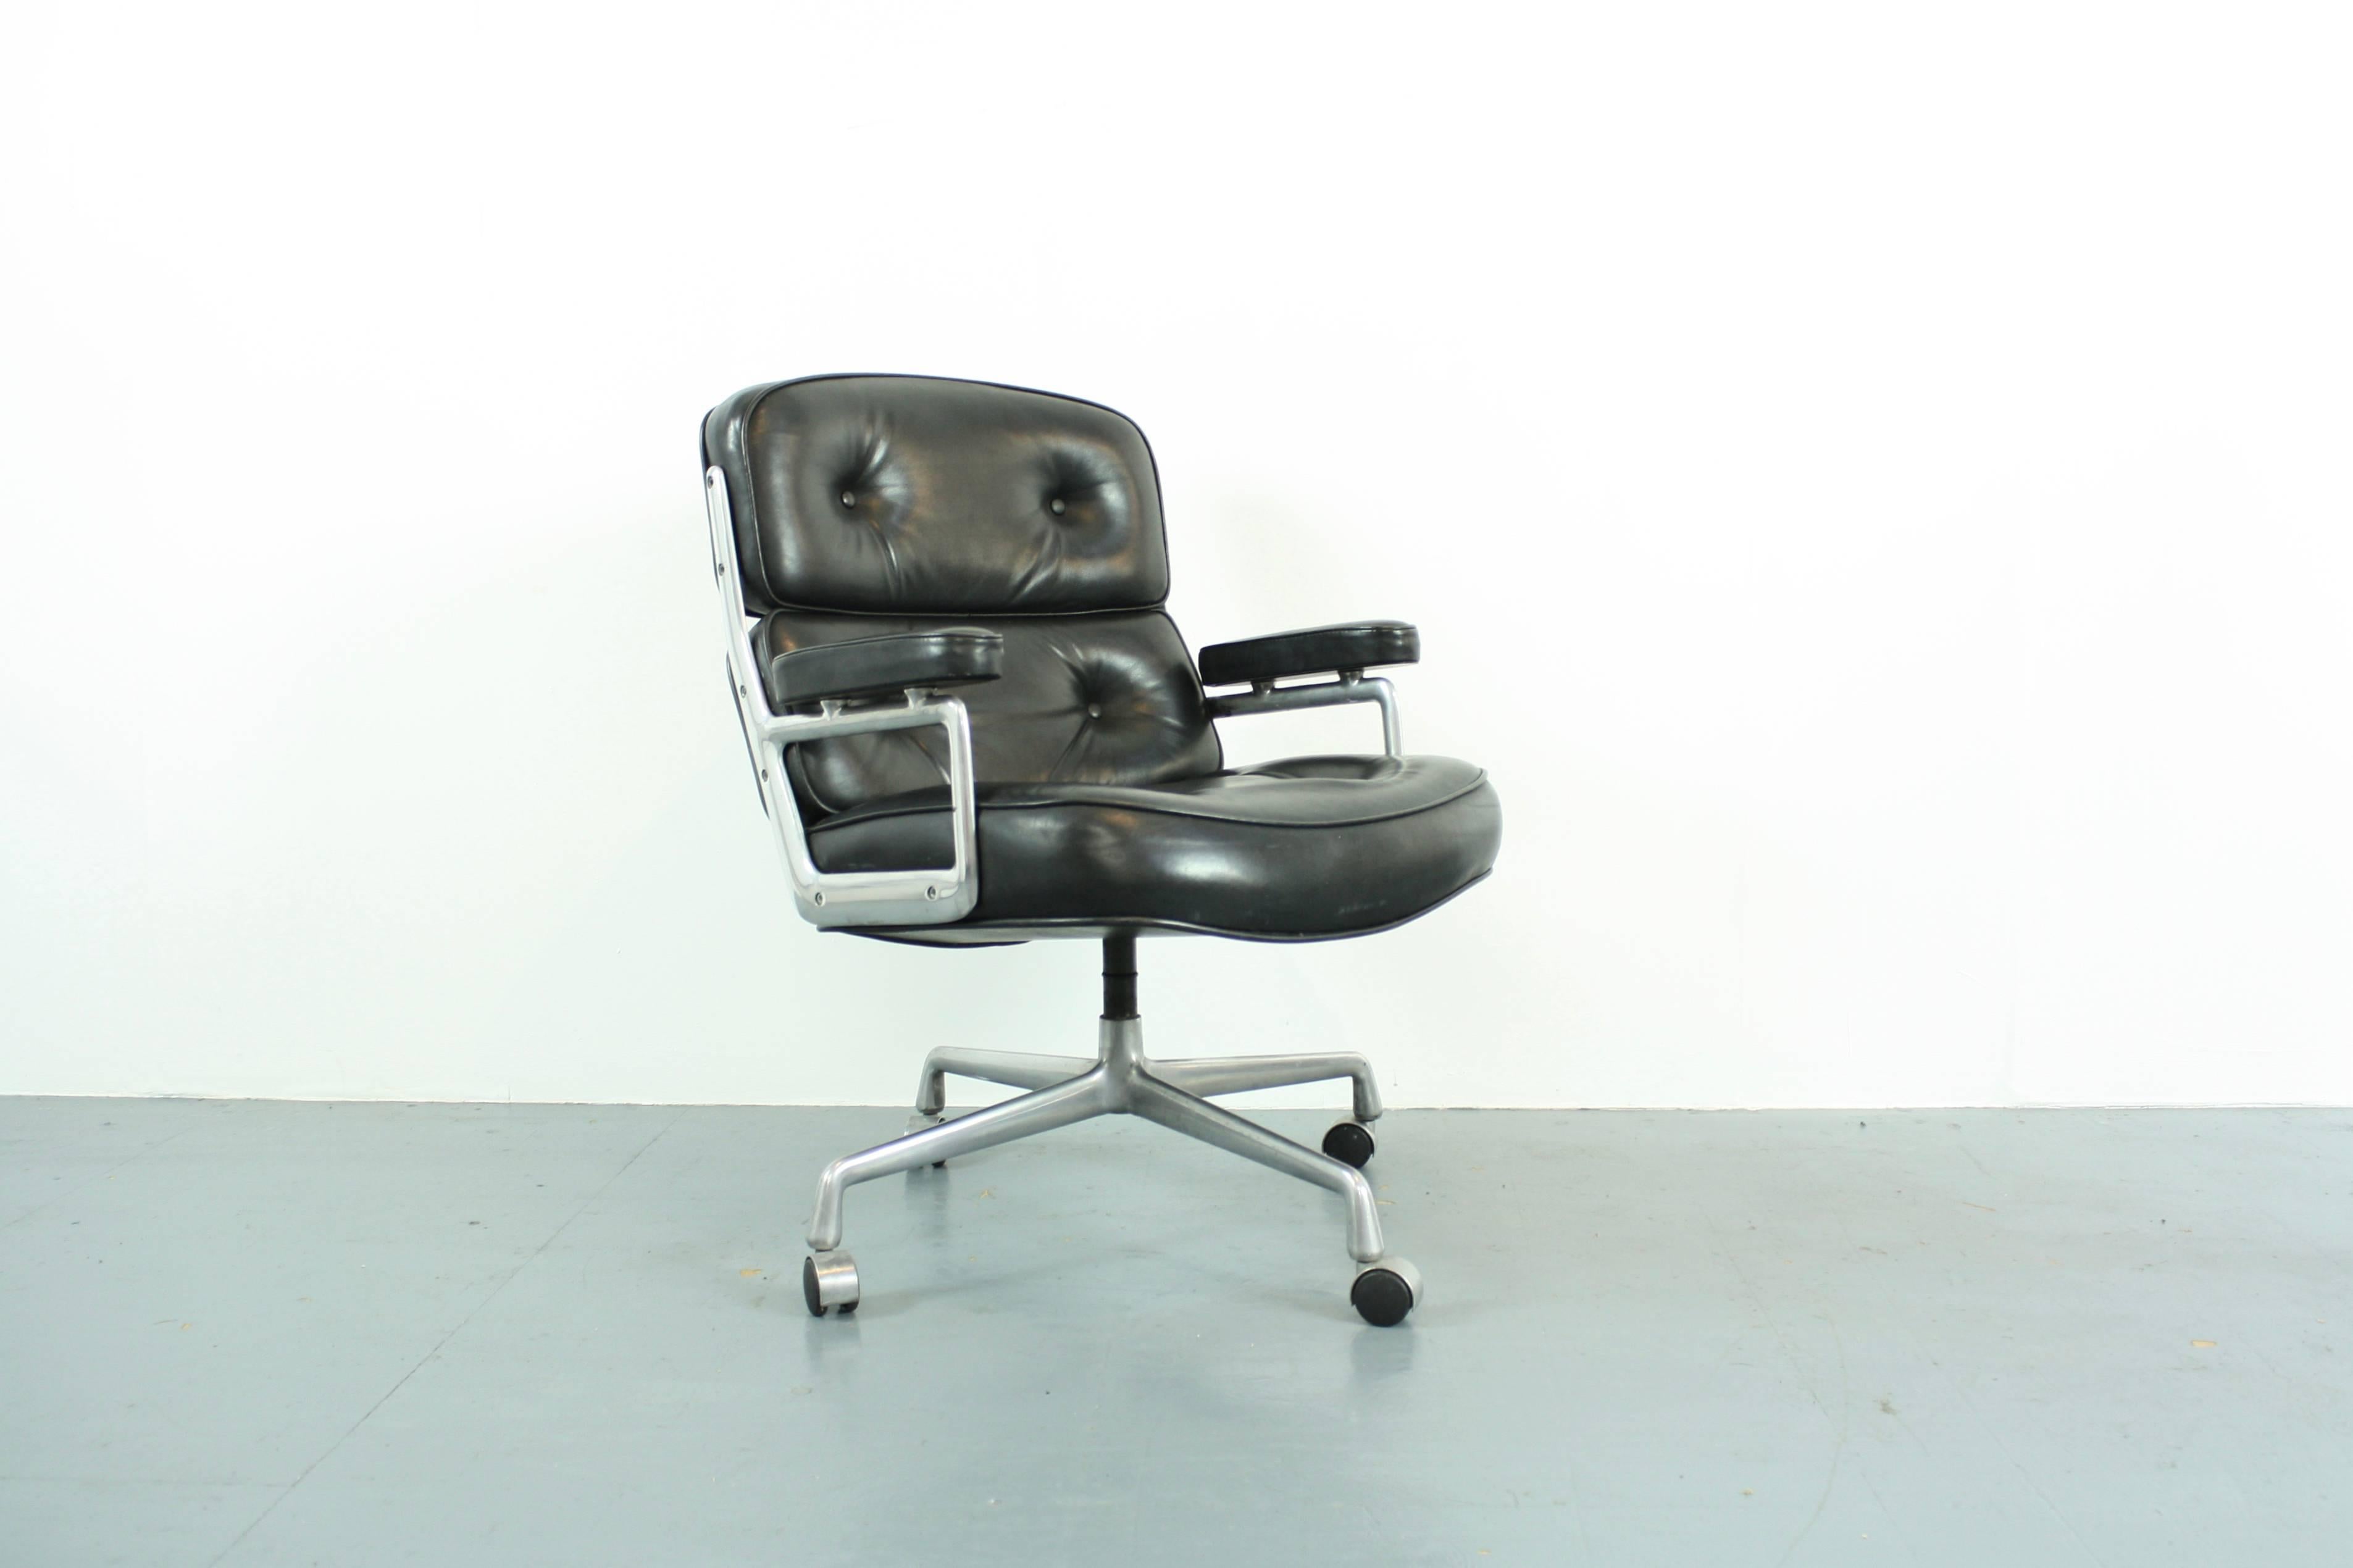 Vintage black leather Time-Life chair, designed by Eames at the request of his friend Henry Luce for the lobby of Luce's Time-Life building in 1960. With swivel action. 

Overall in very good vintage condition. Tan leather upholstery in good